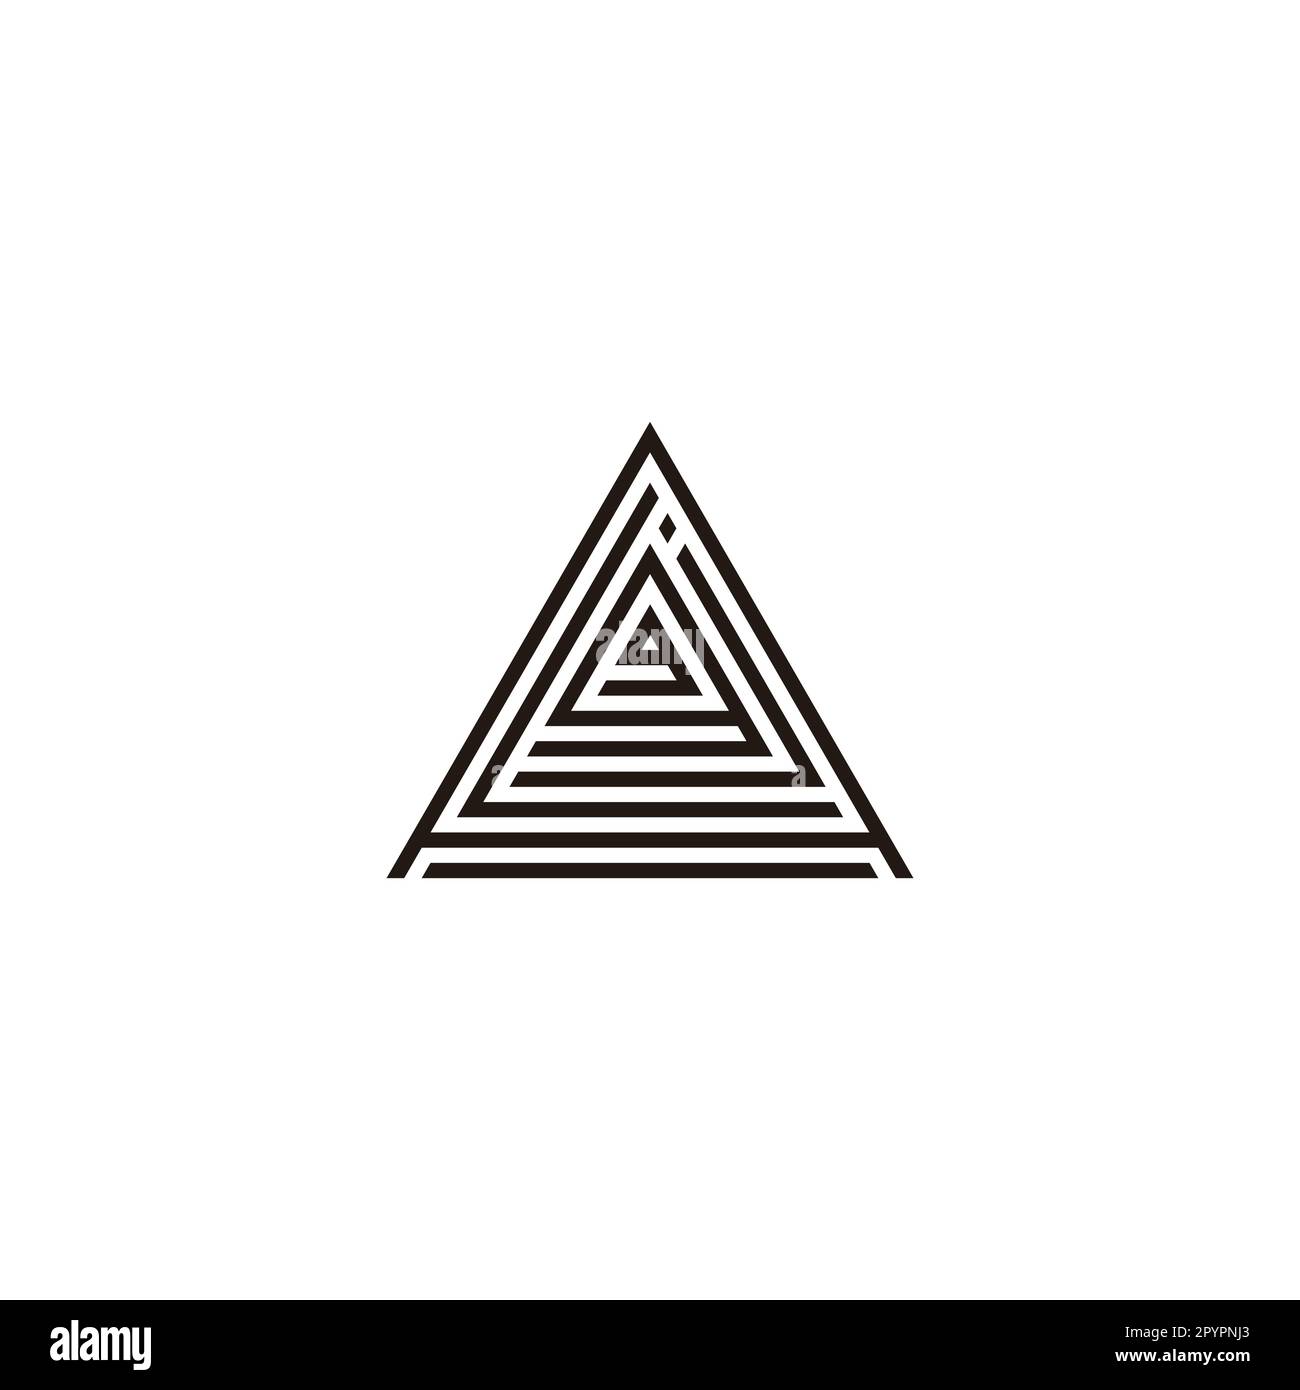 Letter A, L, j, g and g triangle line geometric symbol simple logo ...